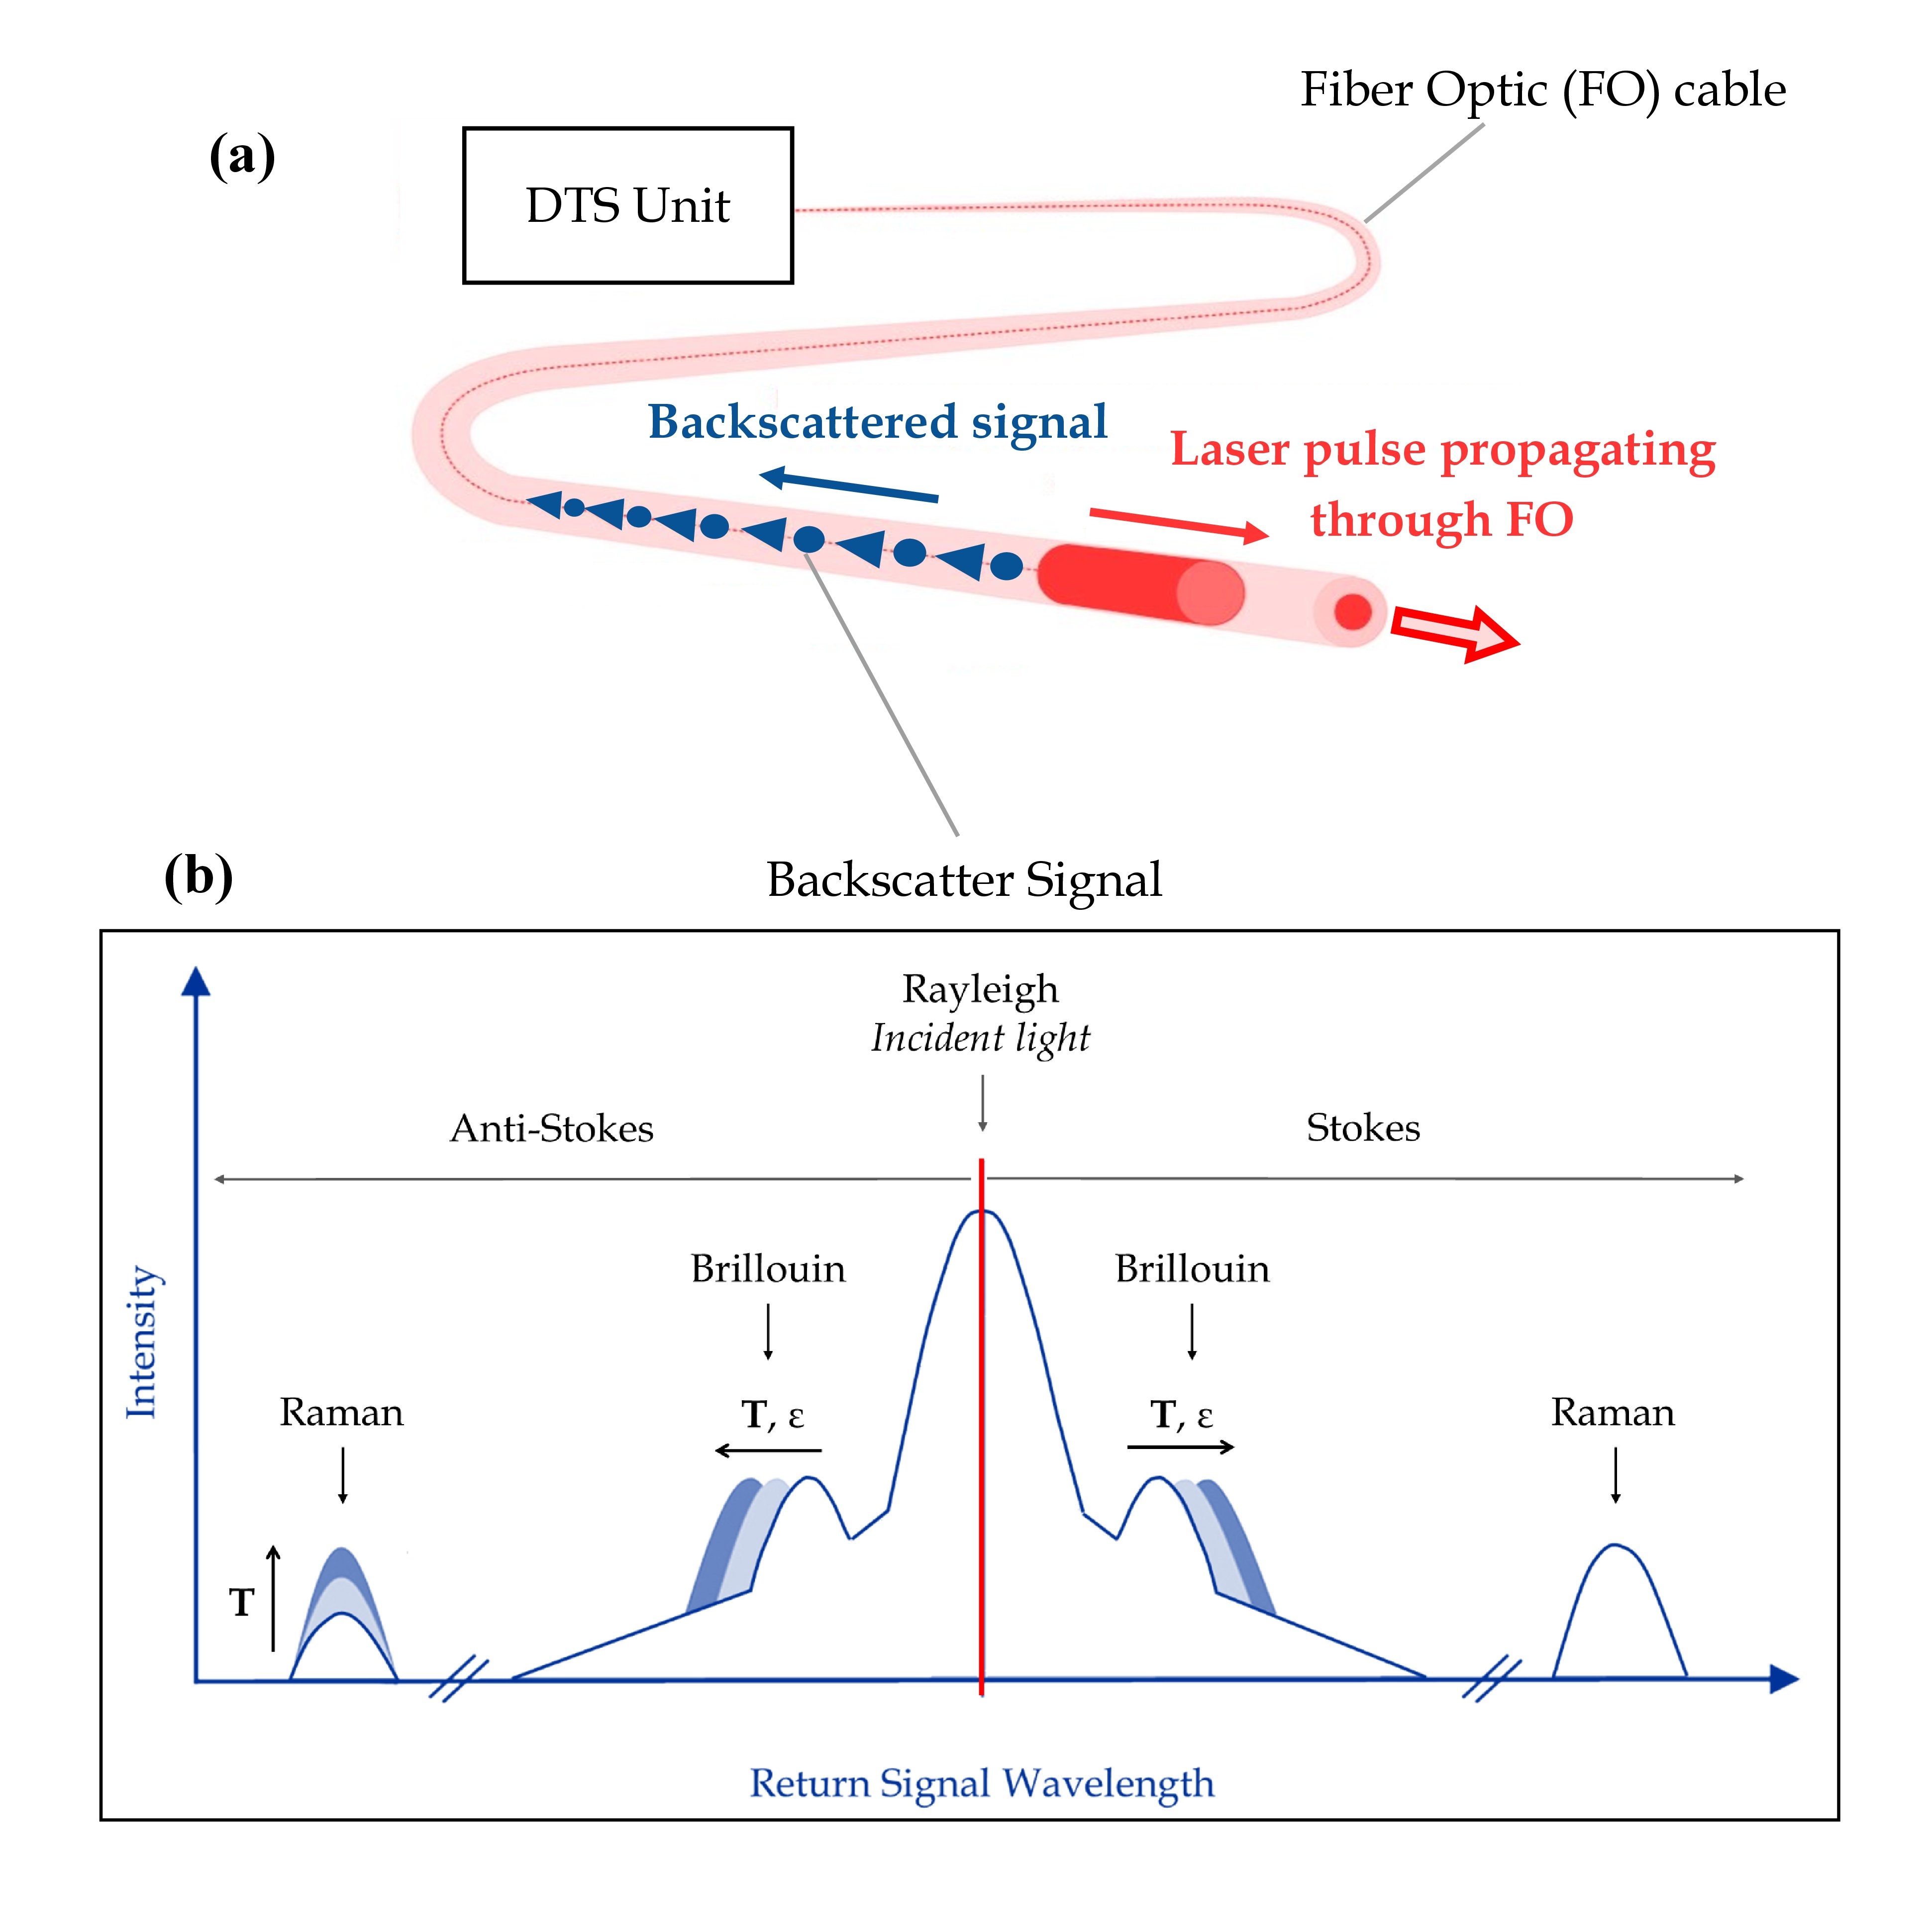 (a) Principle of FO-DTS measurements. (b) Spectrum of the backscattered light returning back towards the DTS unit. Apart from the Rayleigh band which has the same wavelength as the incident laser pulse, the backscattered signal is shifted towards higher and lower wavelengths, called Stokes and Anti-Stokes components respectively. Stokes and Anti-Stokes signals result from Brillouin and Raman scatterings. Brillouin Stokes and Anti-Stokes components are both sensitive to strain (ε) and temperature (T) variations whereas, for Raman bands, only the amplitude of the Anti-Stokes component is temperature-dependent.